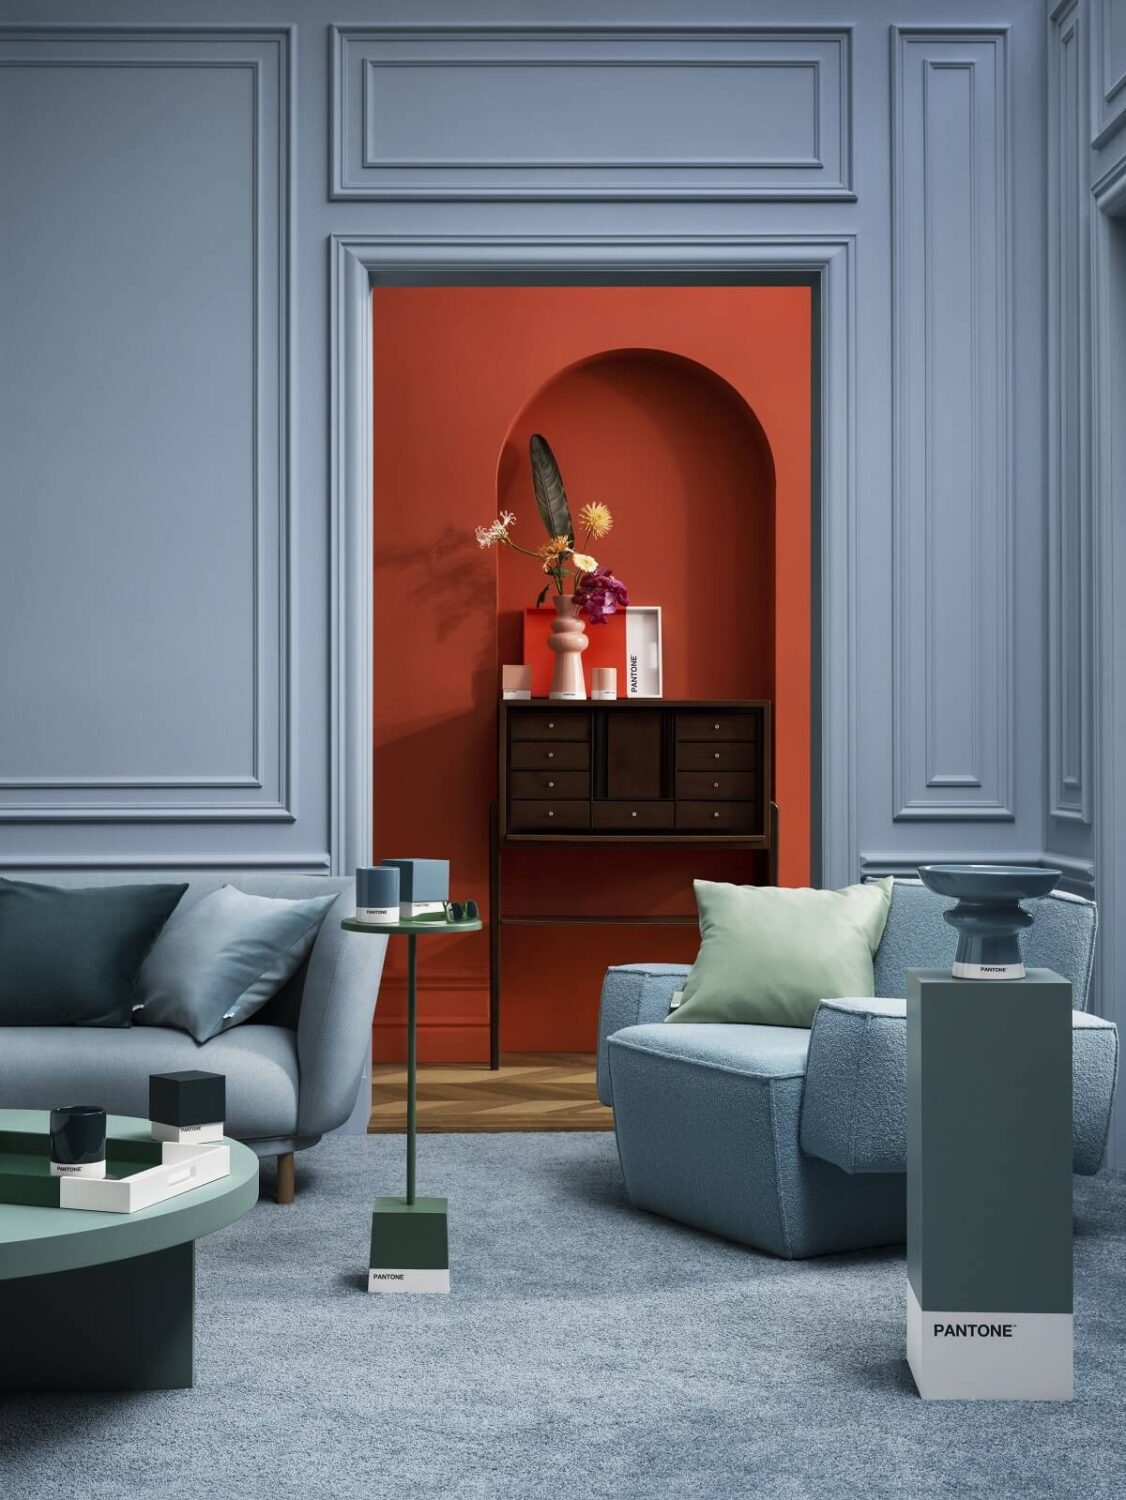 H&M-Home-Pantone-The-Power-of-Color-blue-living-room-red-hallway-arch-nordroom